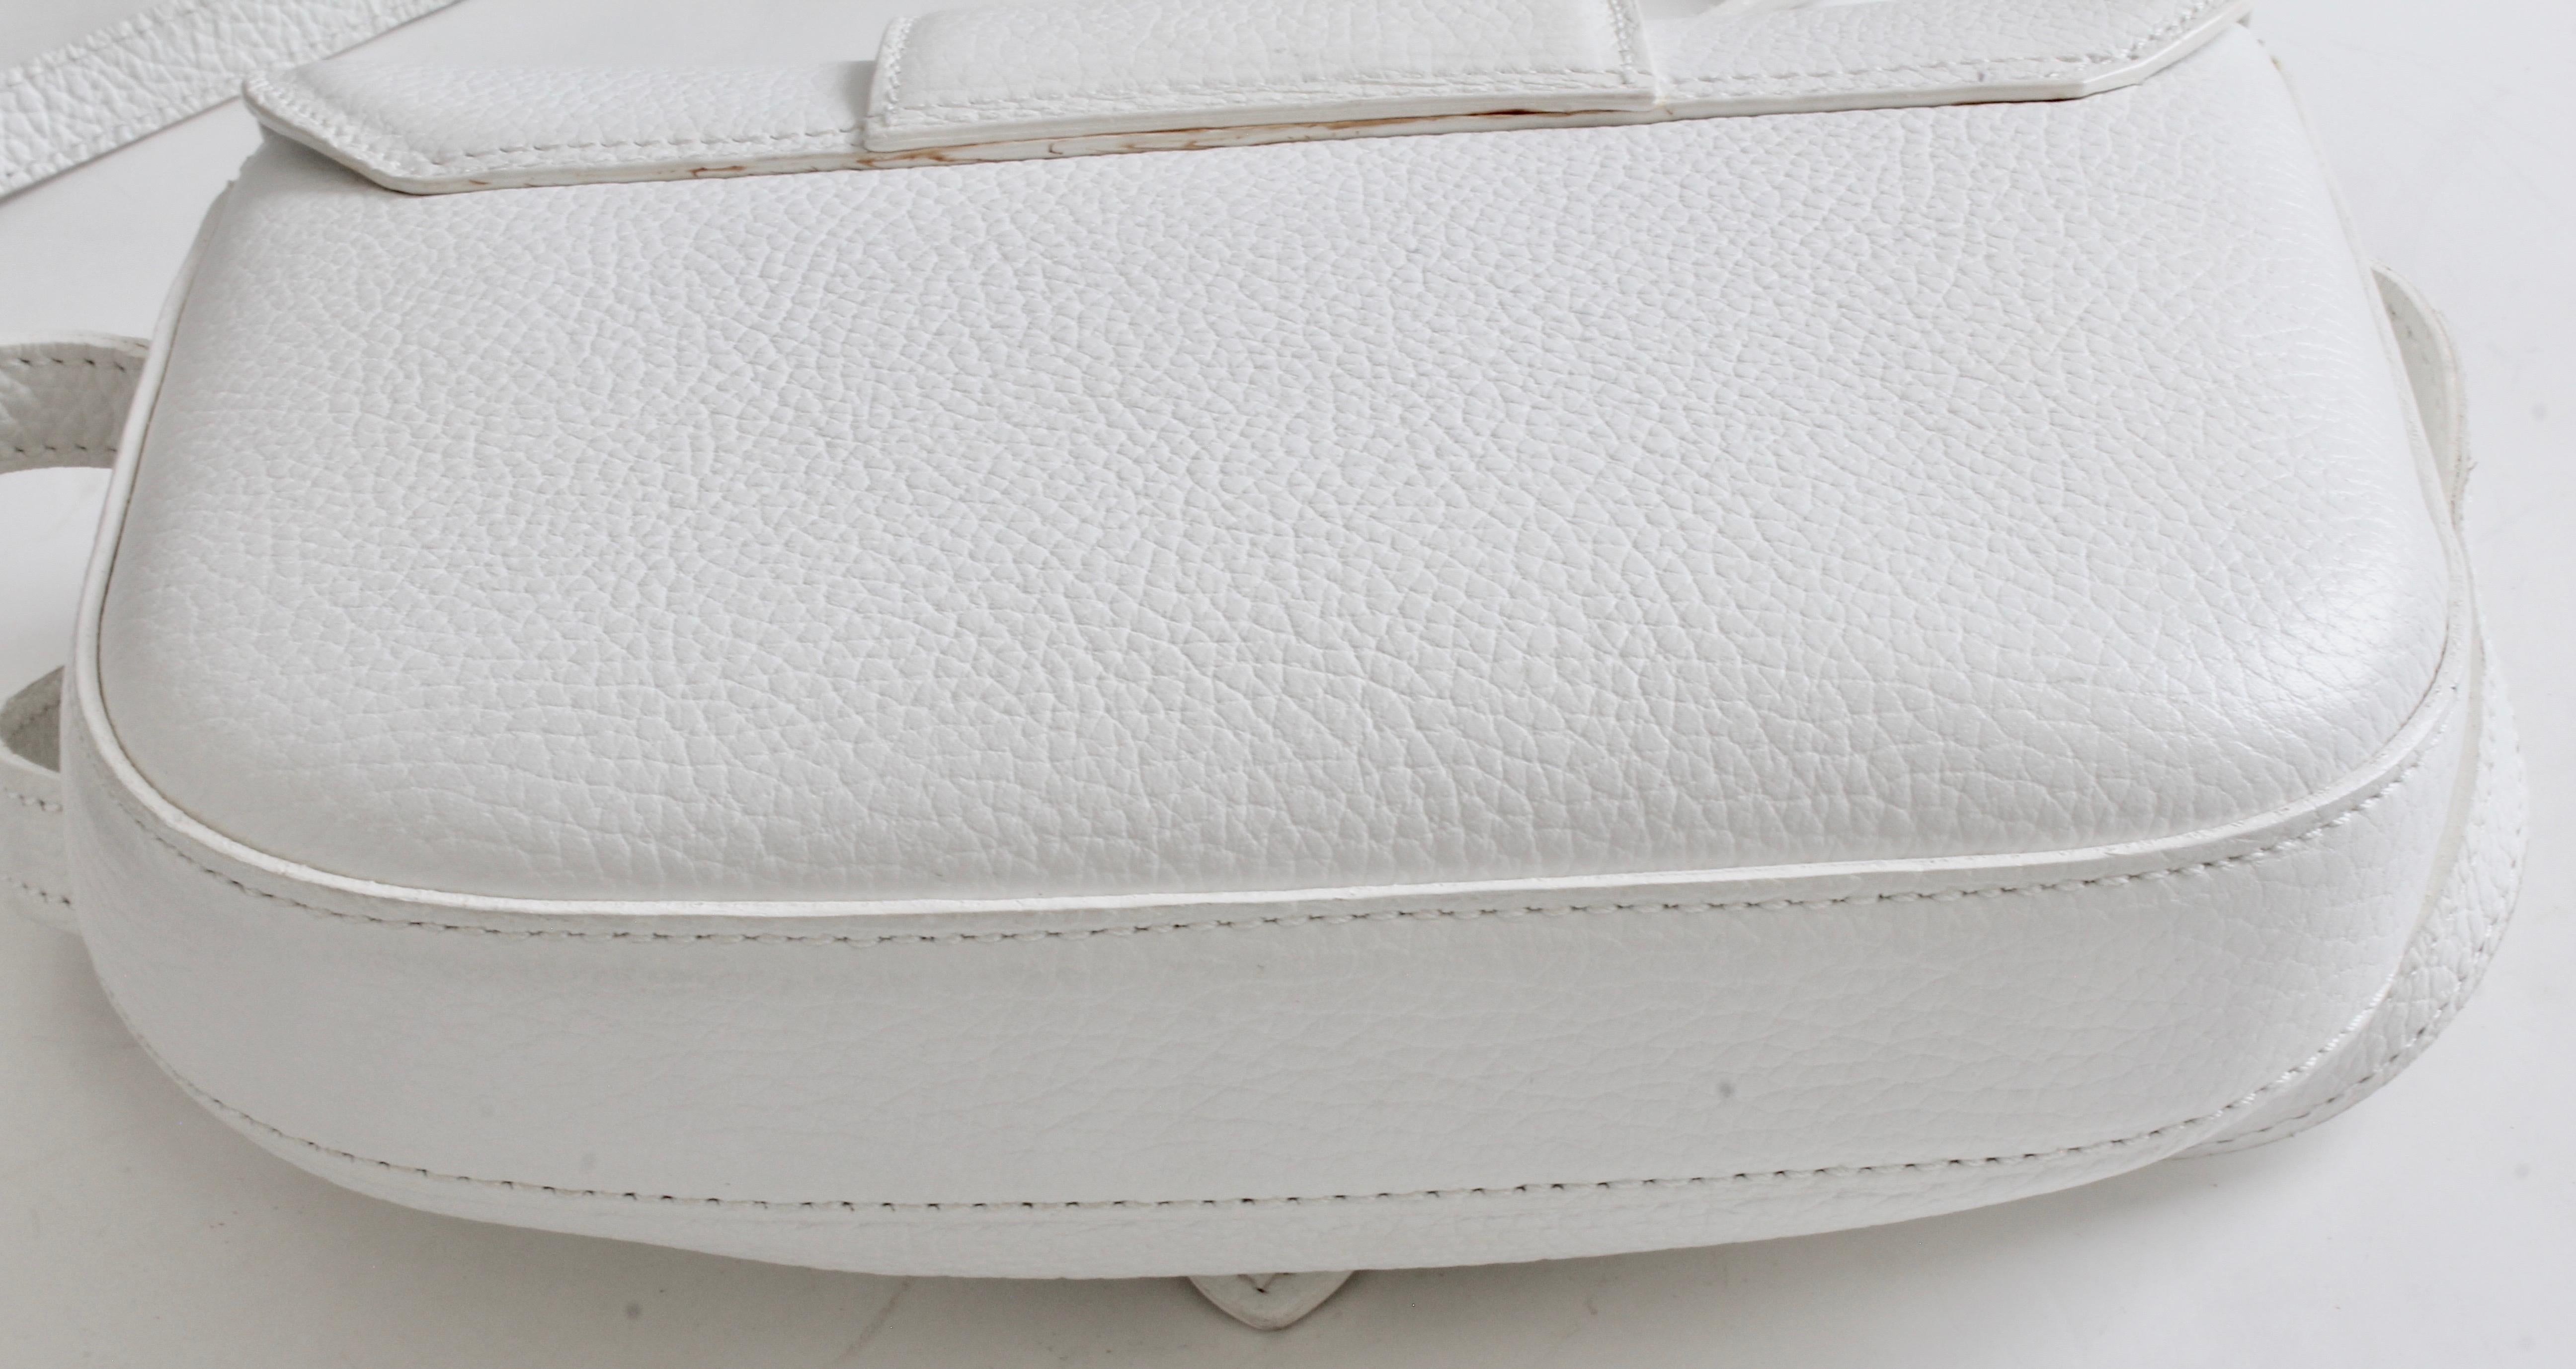 Bally Crossbody Bag White Pebbled Leather Top Flap Shoulder Bag Italy Vintage For Sale 3